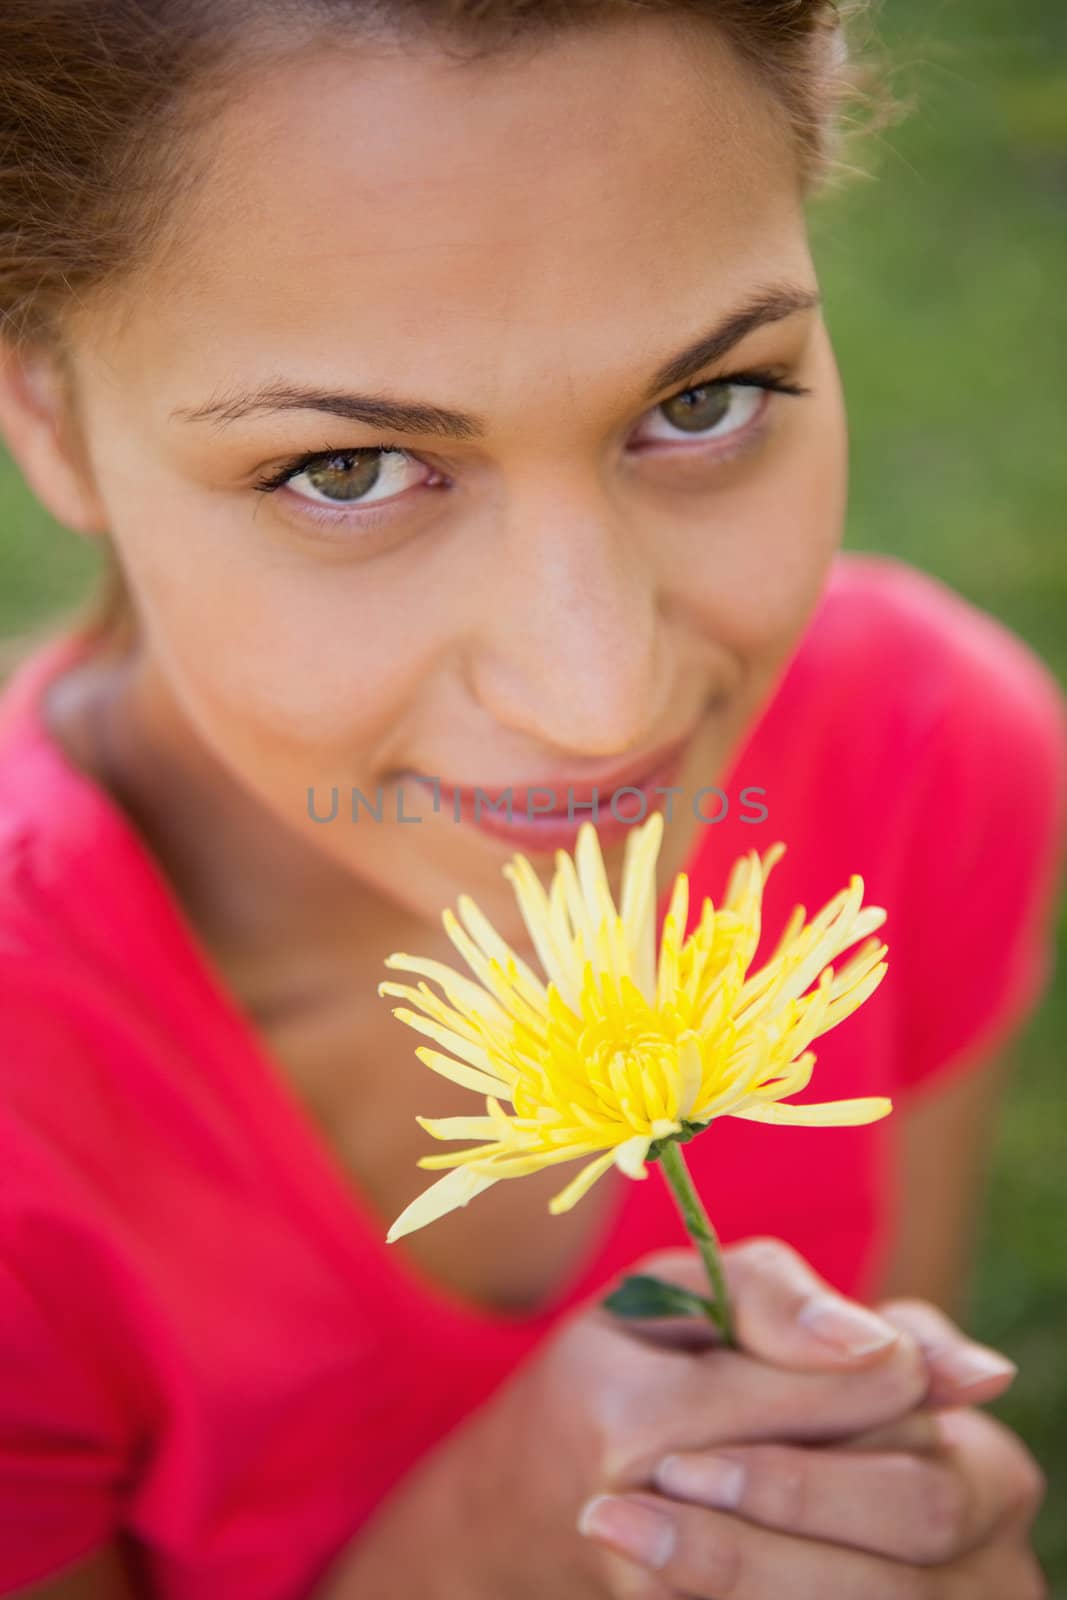 Woman looking upwards while holding a yellow flower by Wavebreakmedia